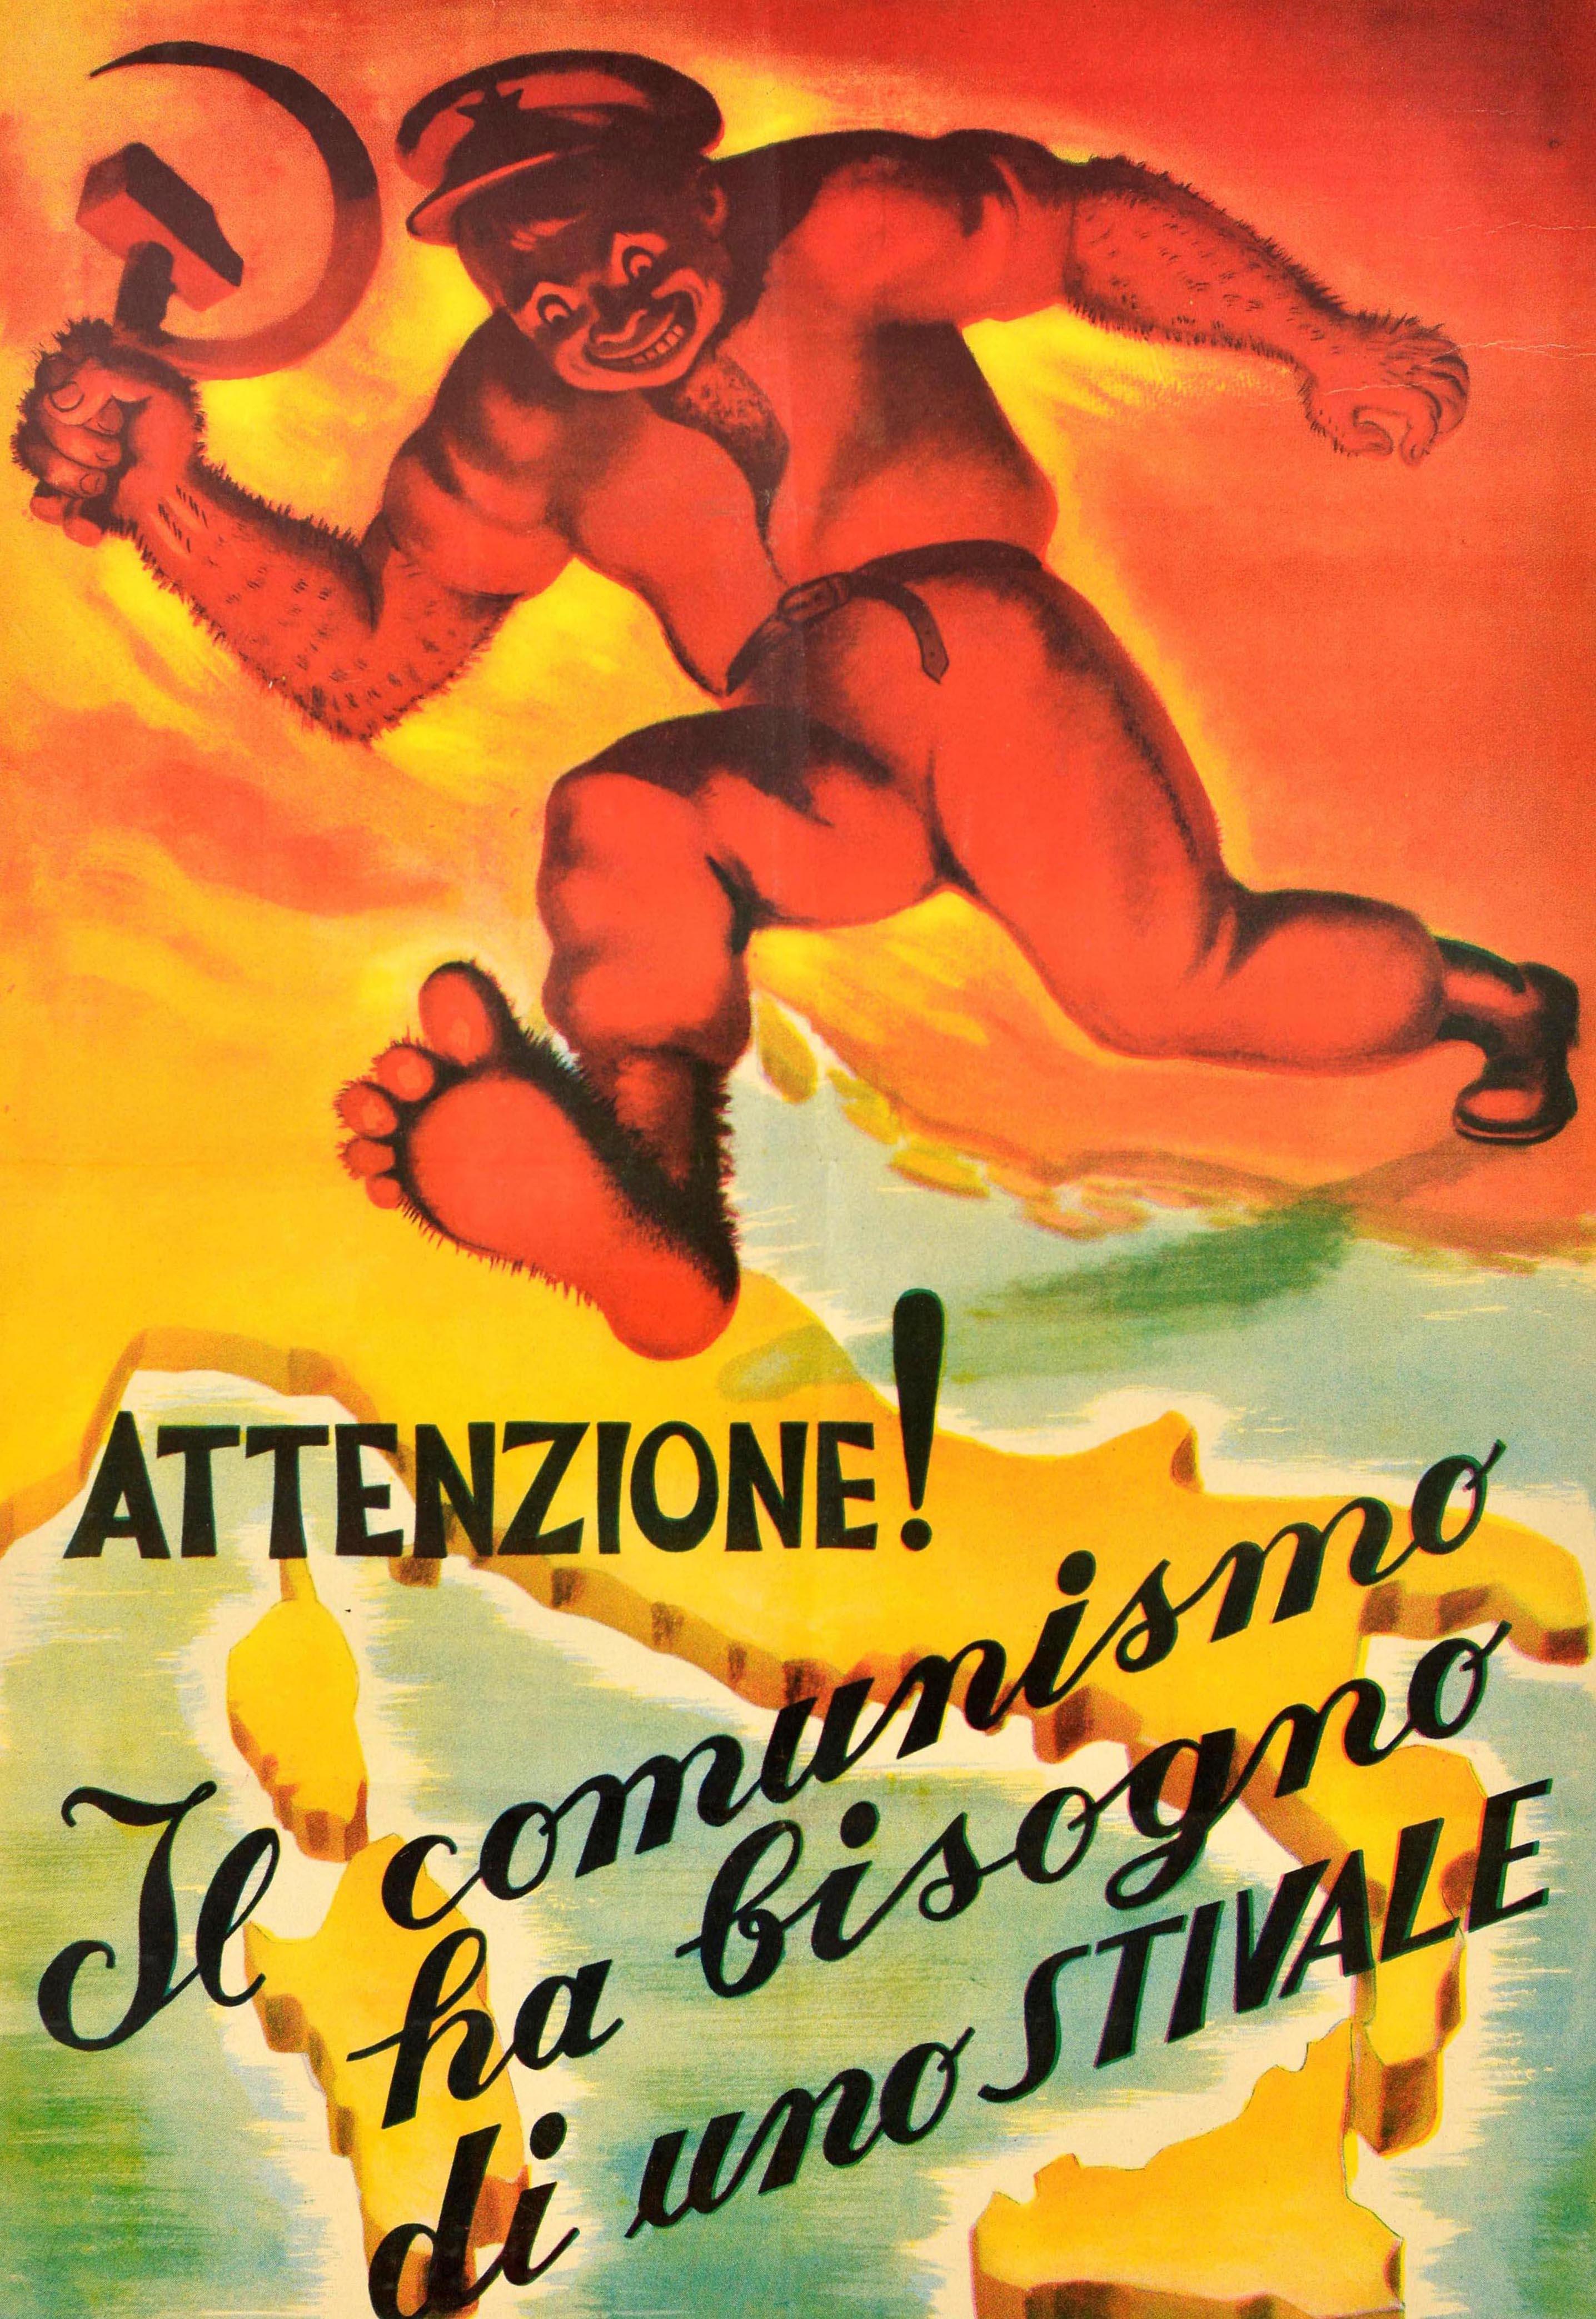 Original vintage political propaganda poster issued by the Christian Democrats in Italy ahead of the 1948 election to try and scare the voters - Attenzione, Il comunismo ha bisogno di uno stivale / Beware! Communism needs a boot. Great image of a